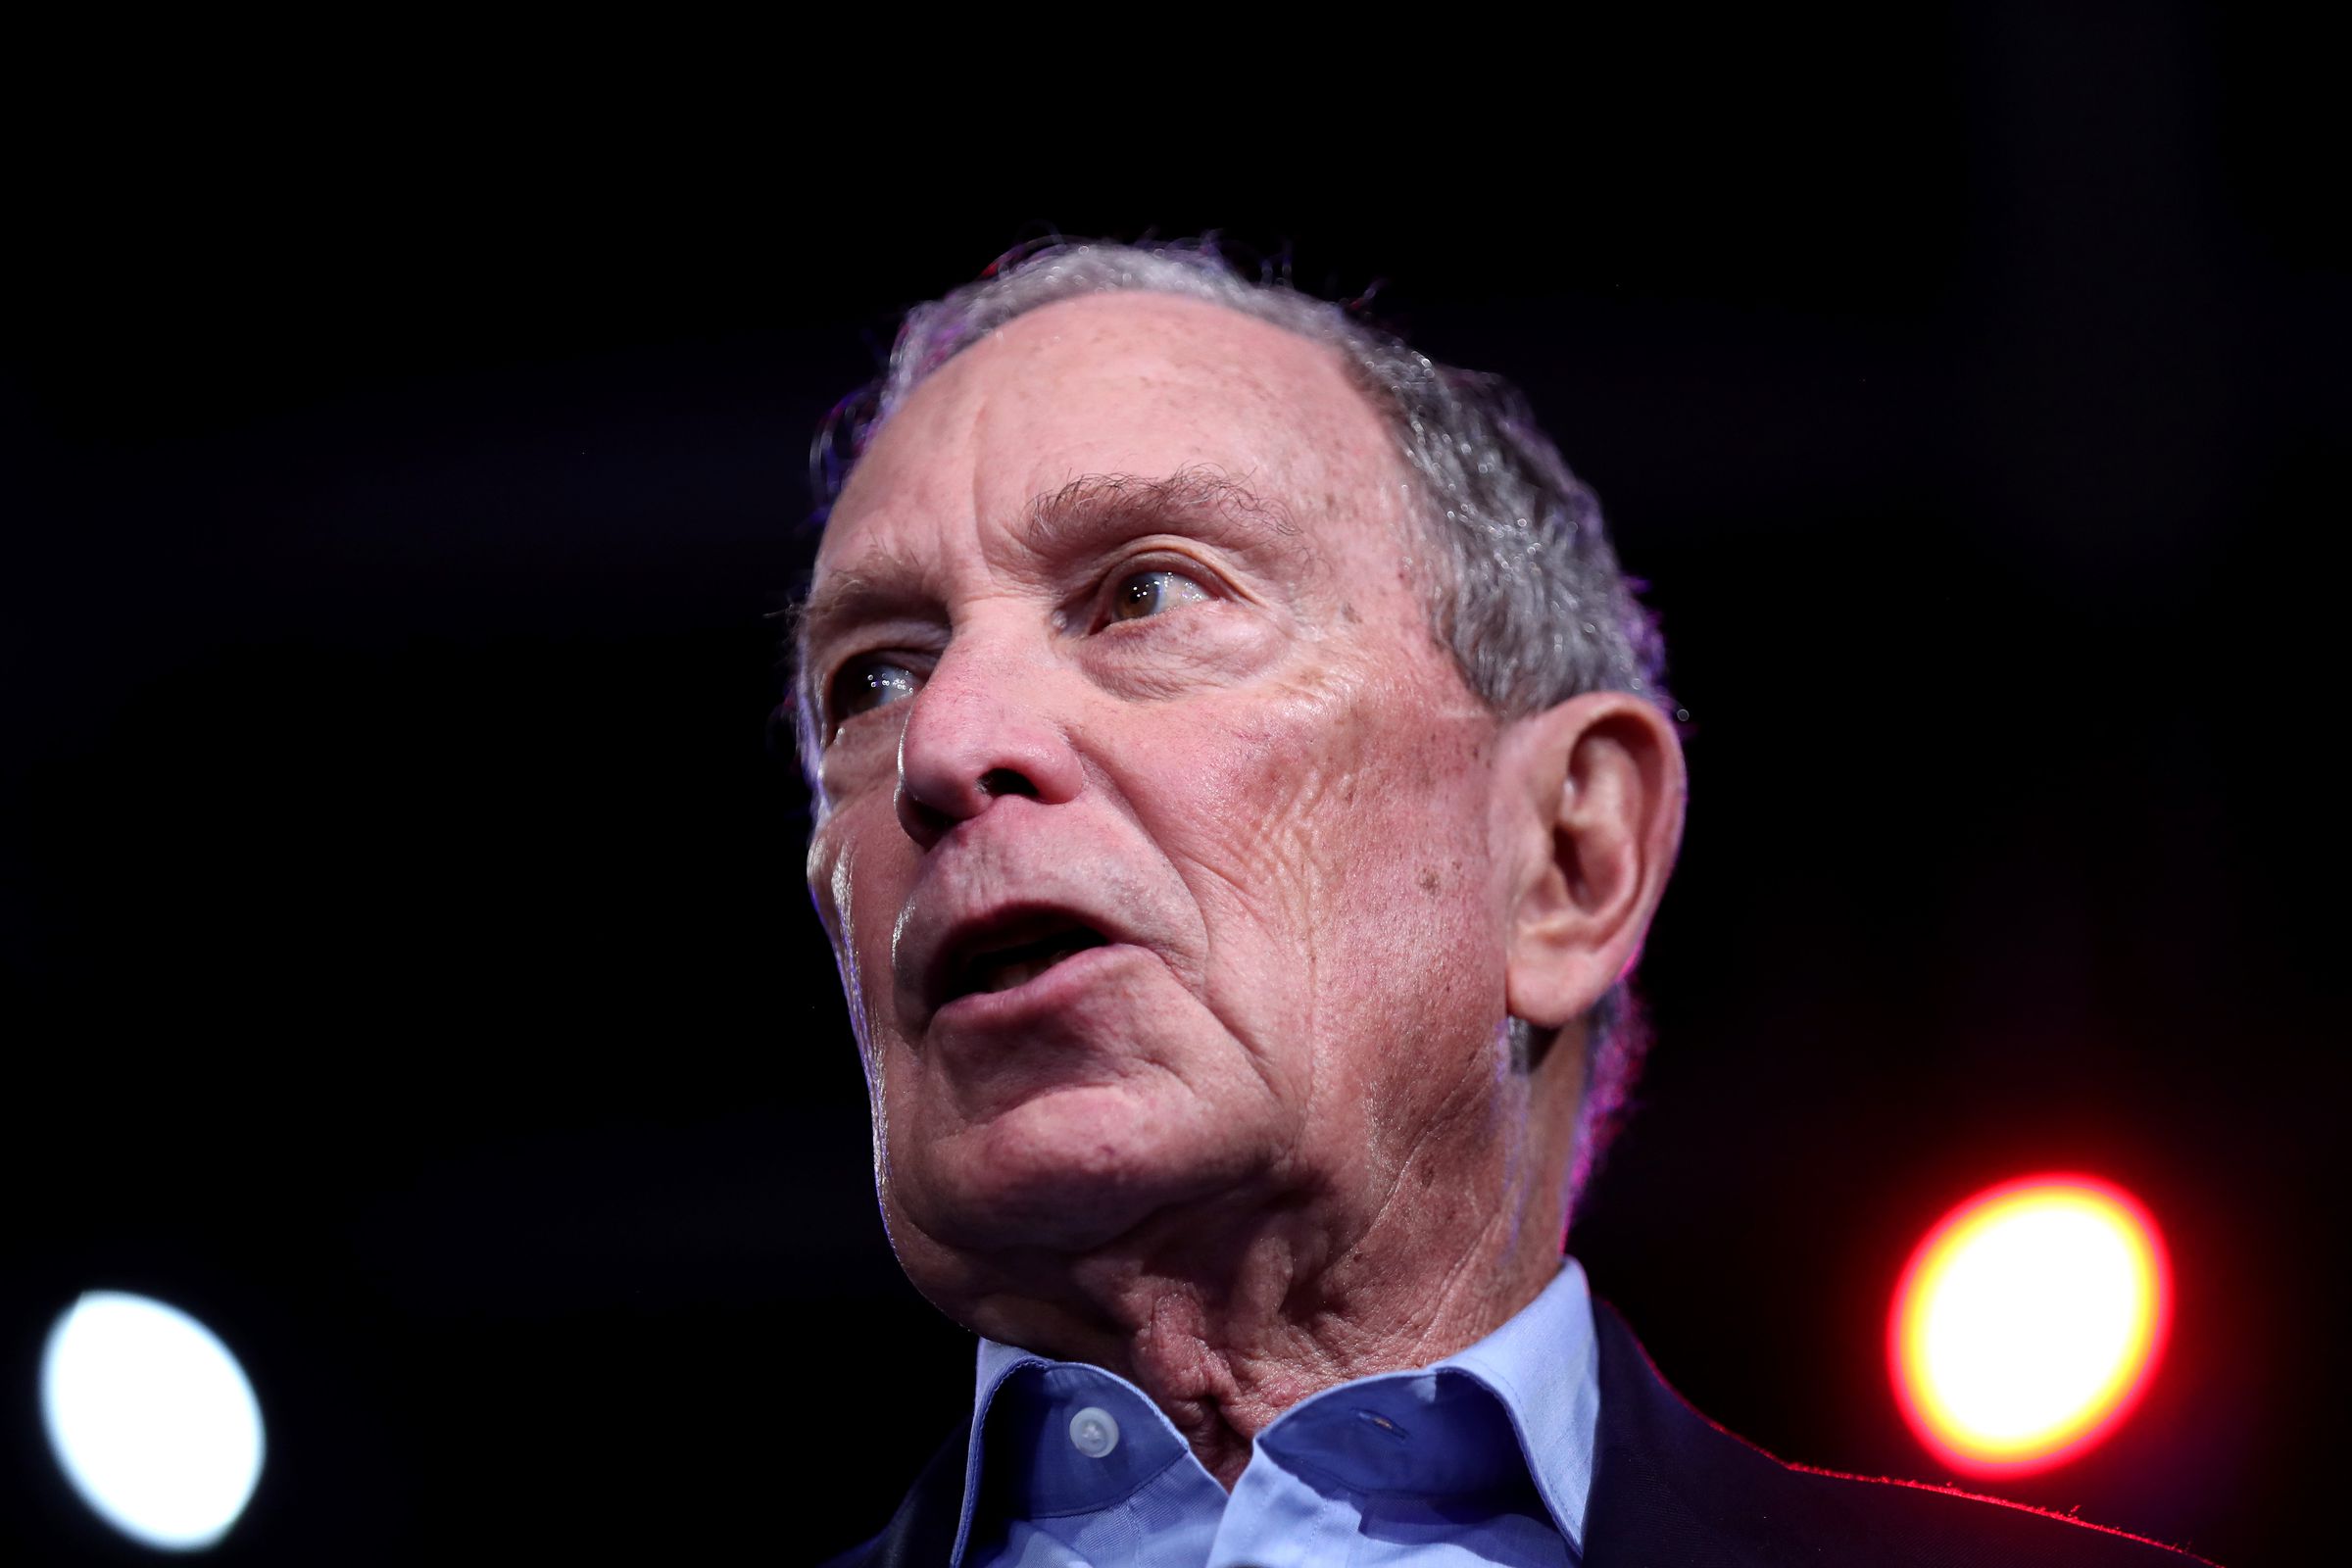 Presidential Candidate Mike Bloomberg Holds Super Tuesday Event In West Palm Beach, FL